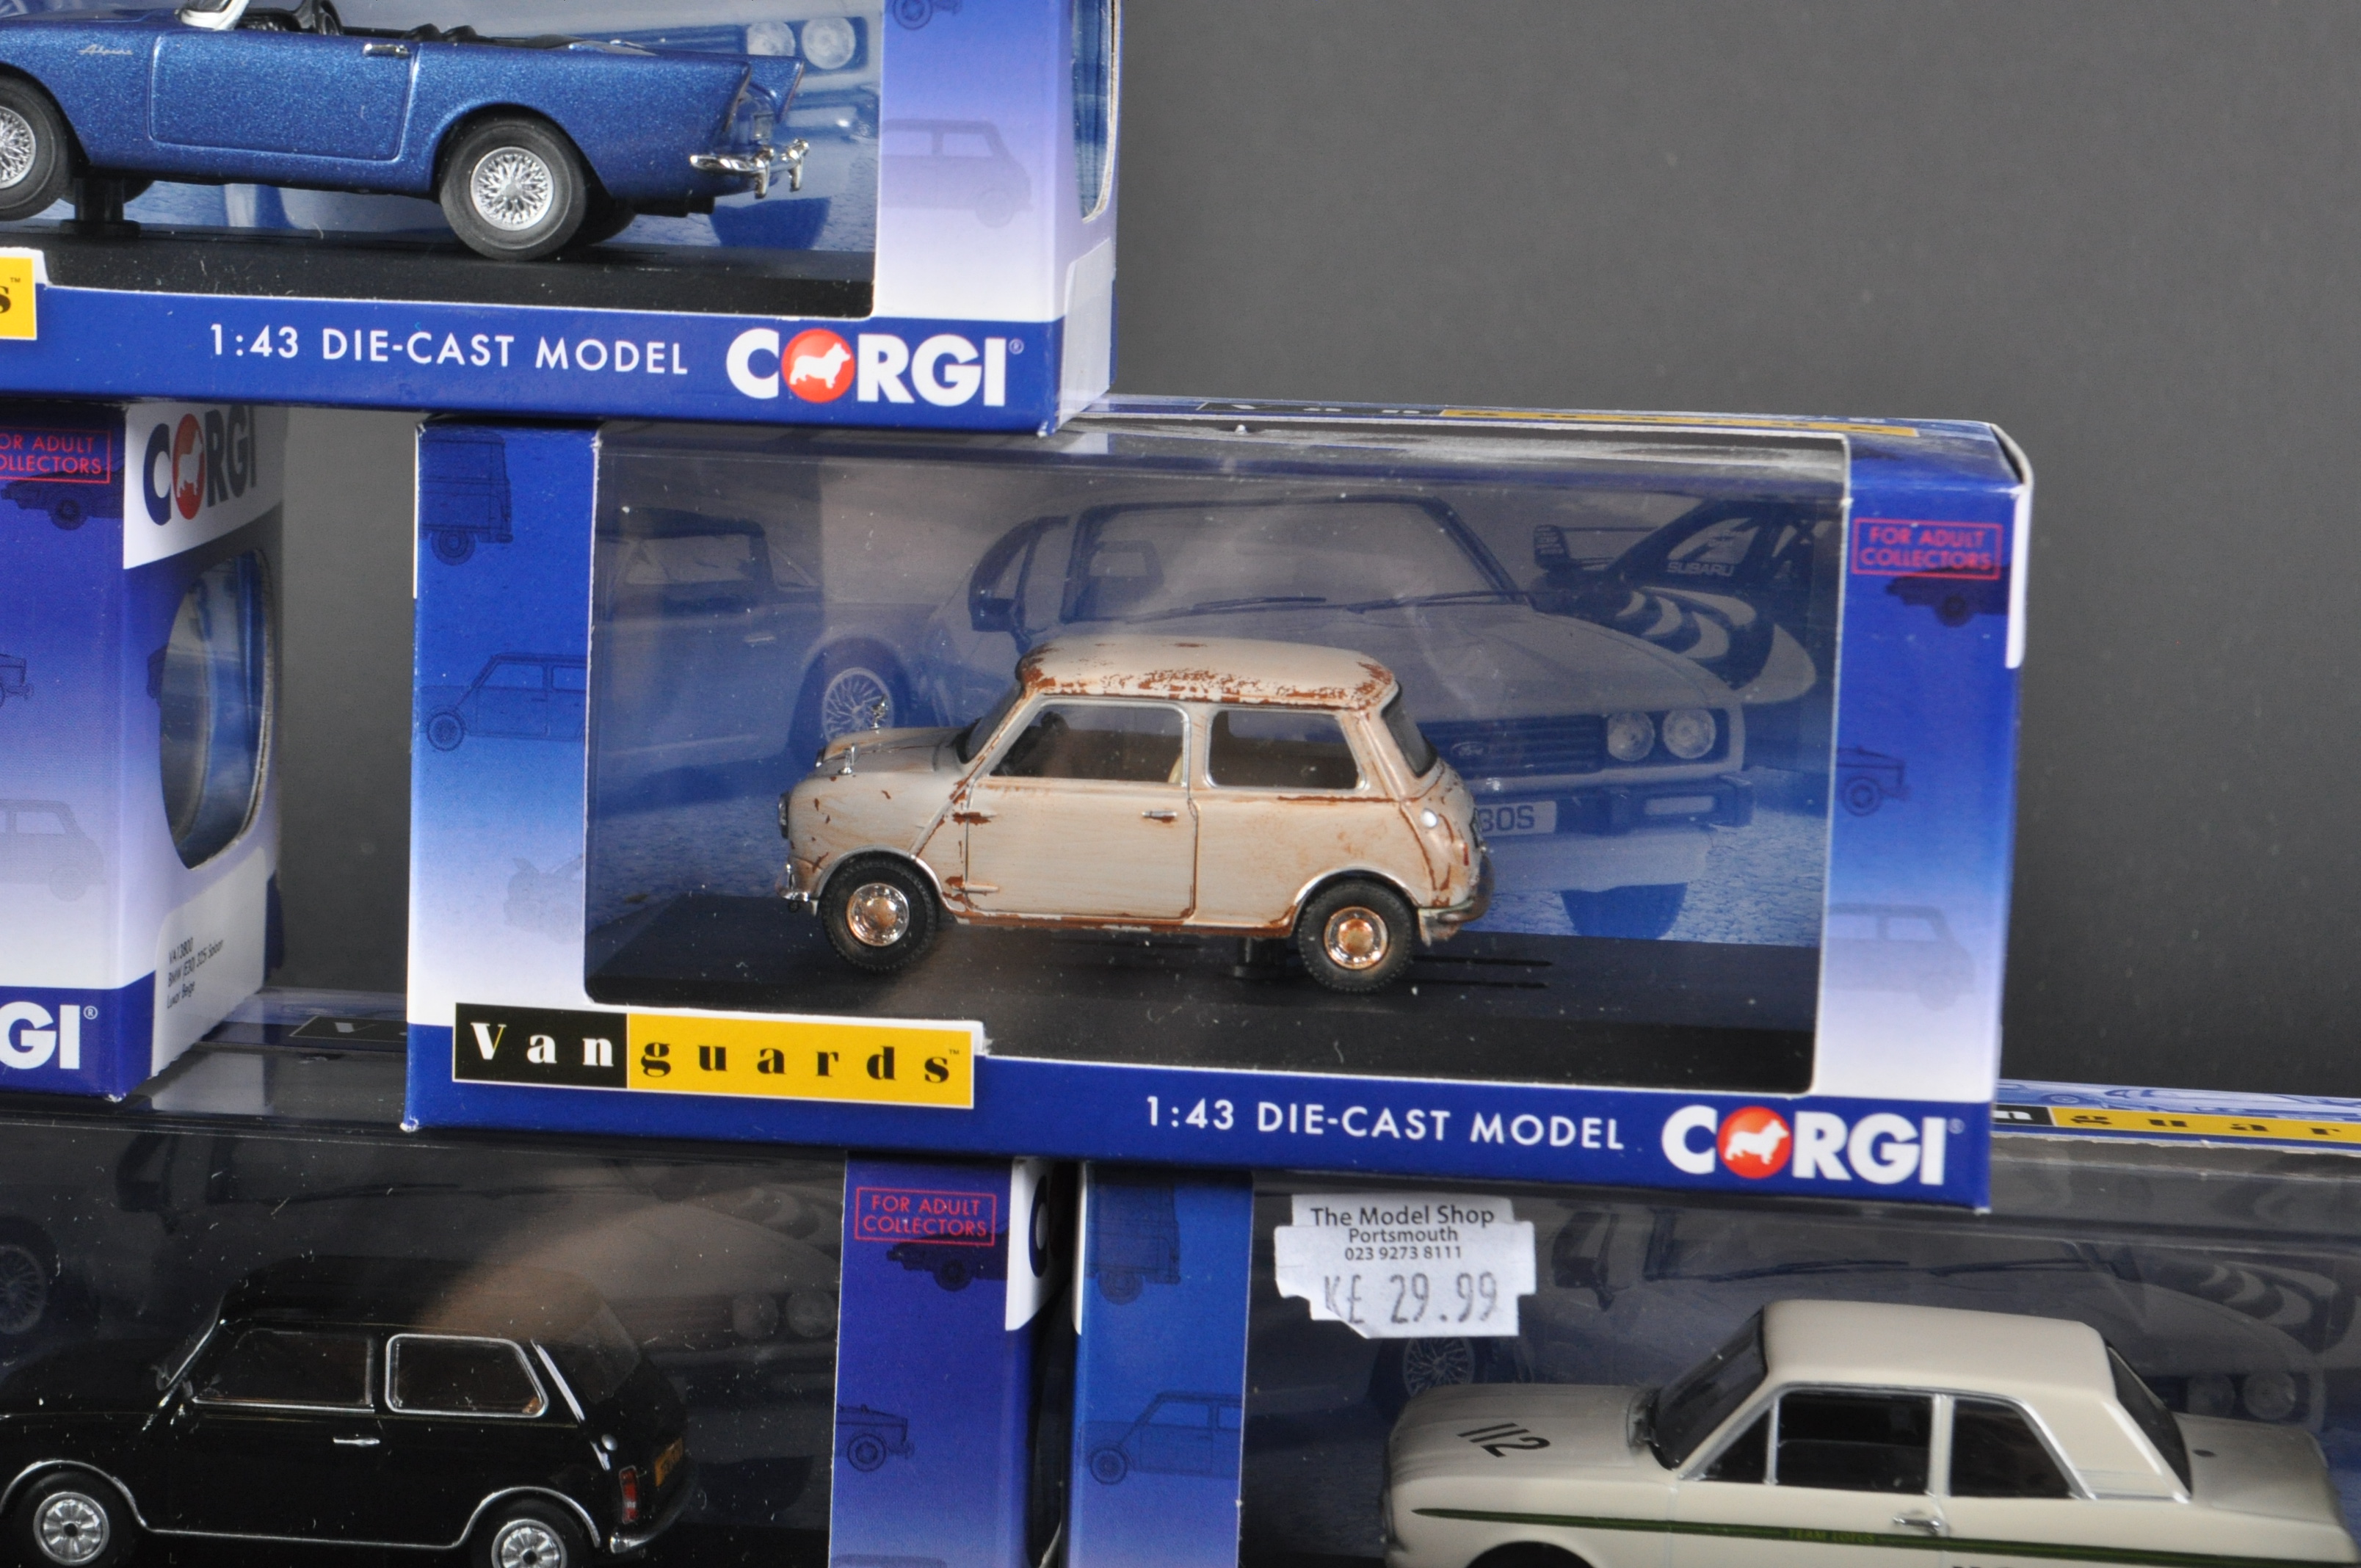 COLLECTION OF CORGI VANGUARDS 1/43 SCALE DIECAST MODEL CARS - Image 4 of 6